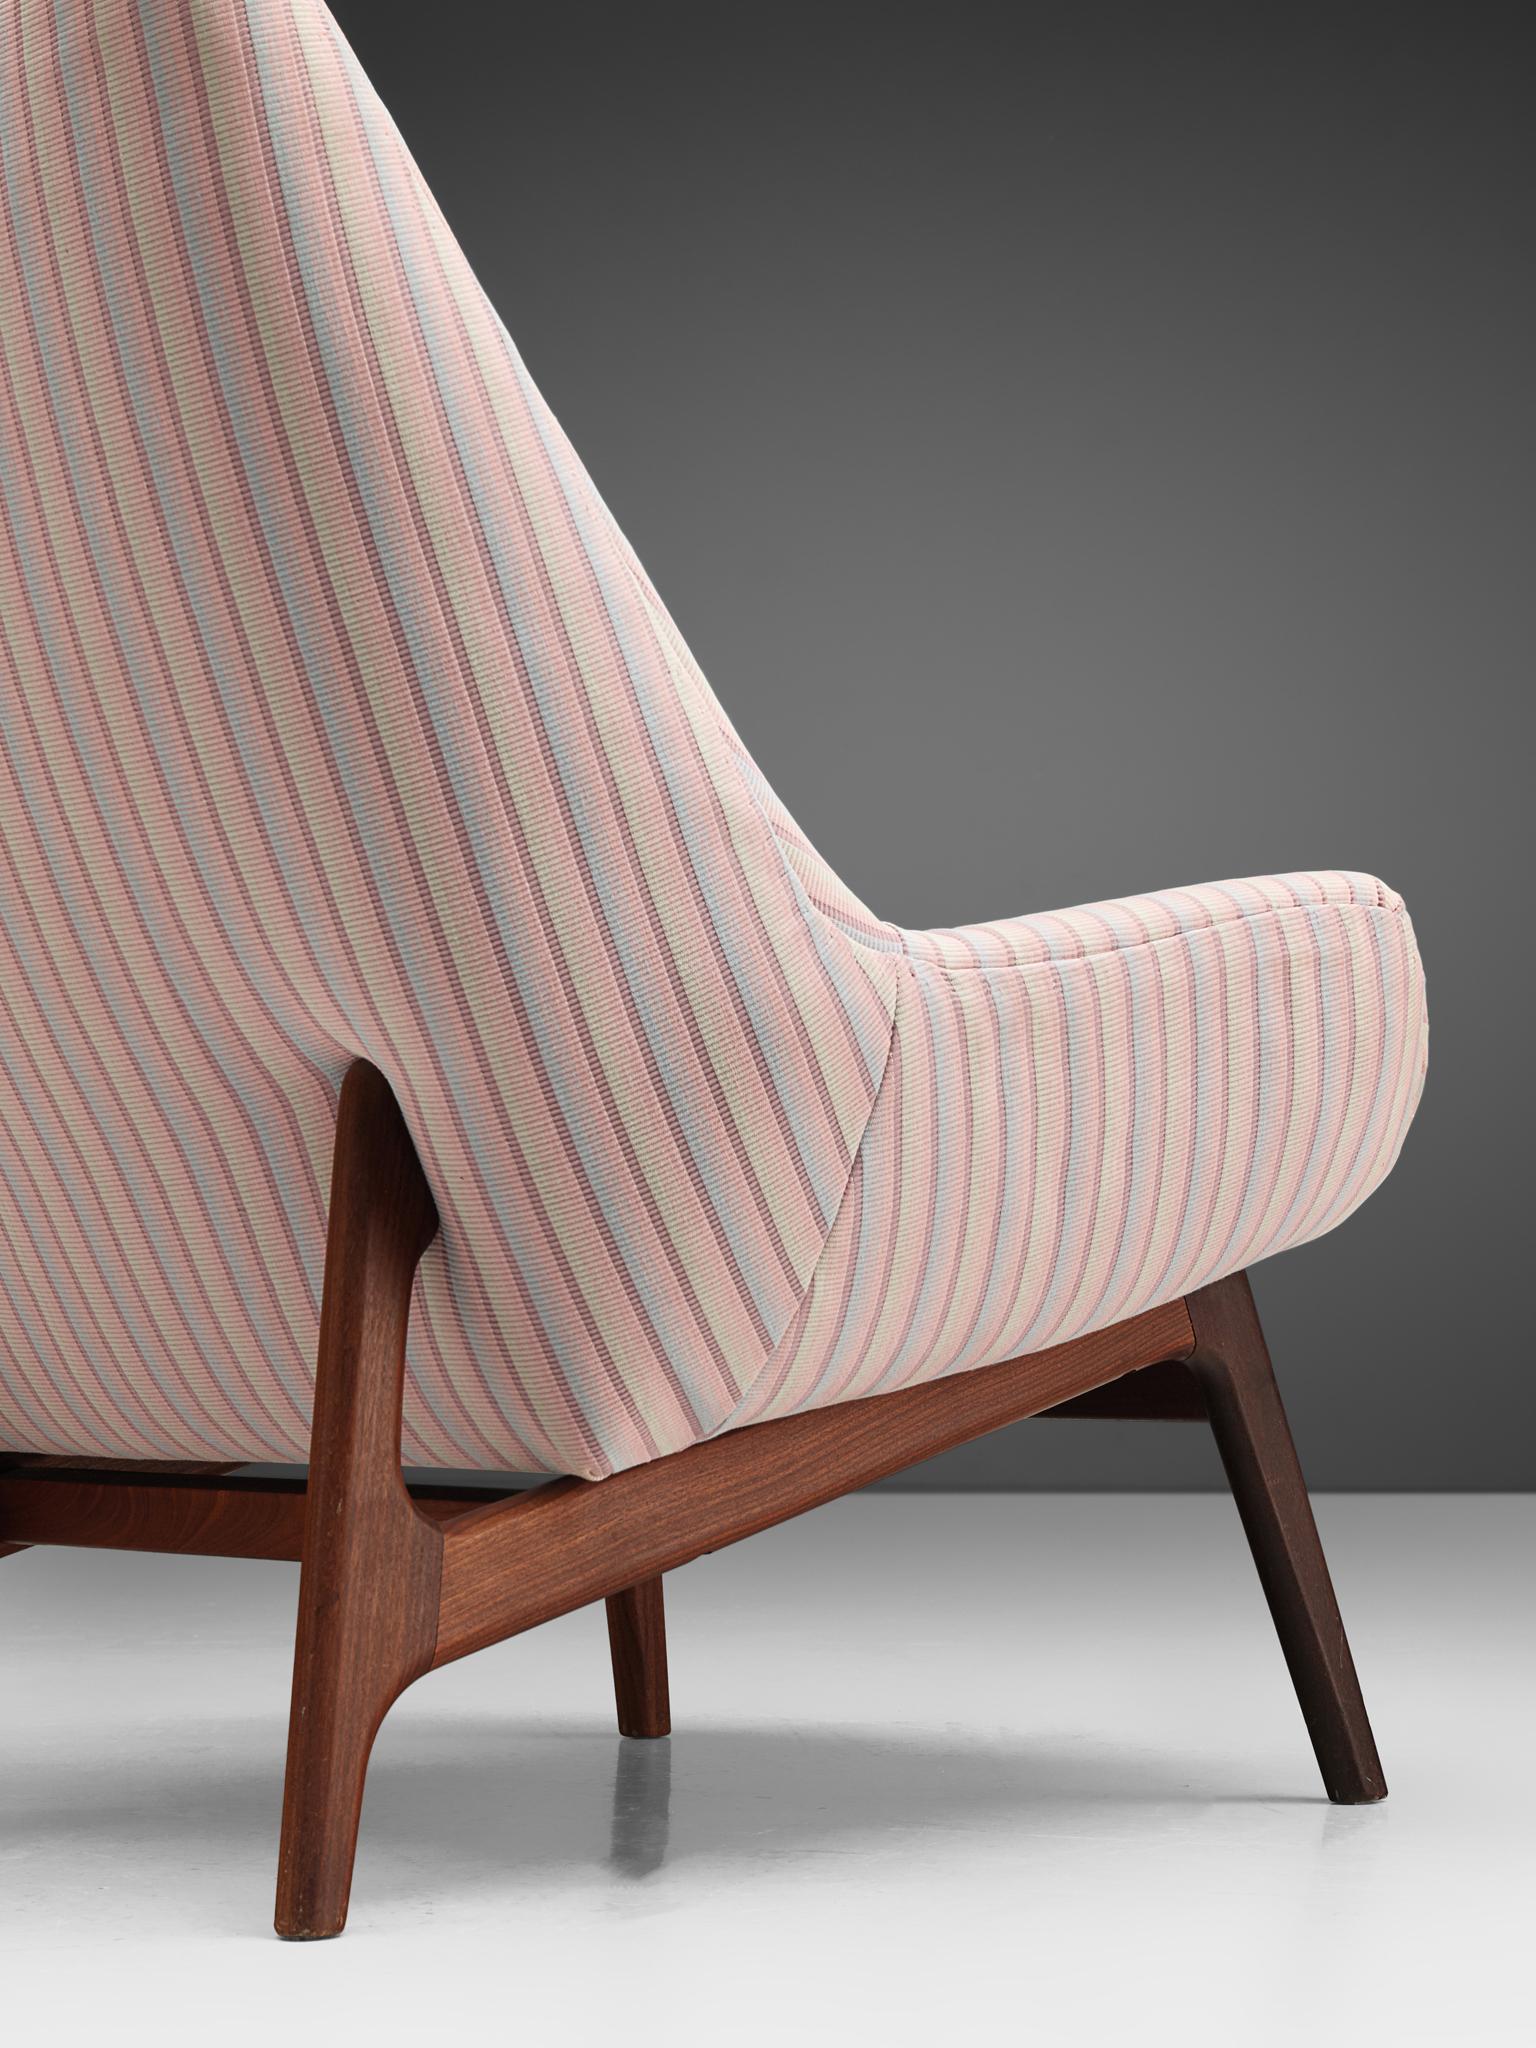 Danish Lounge Chair in Pink Striped Upholstery